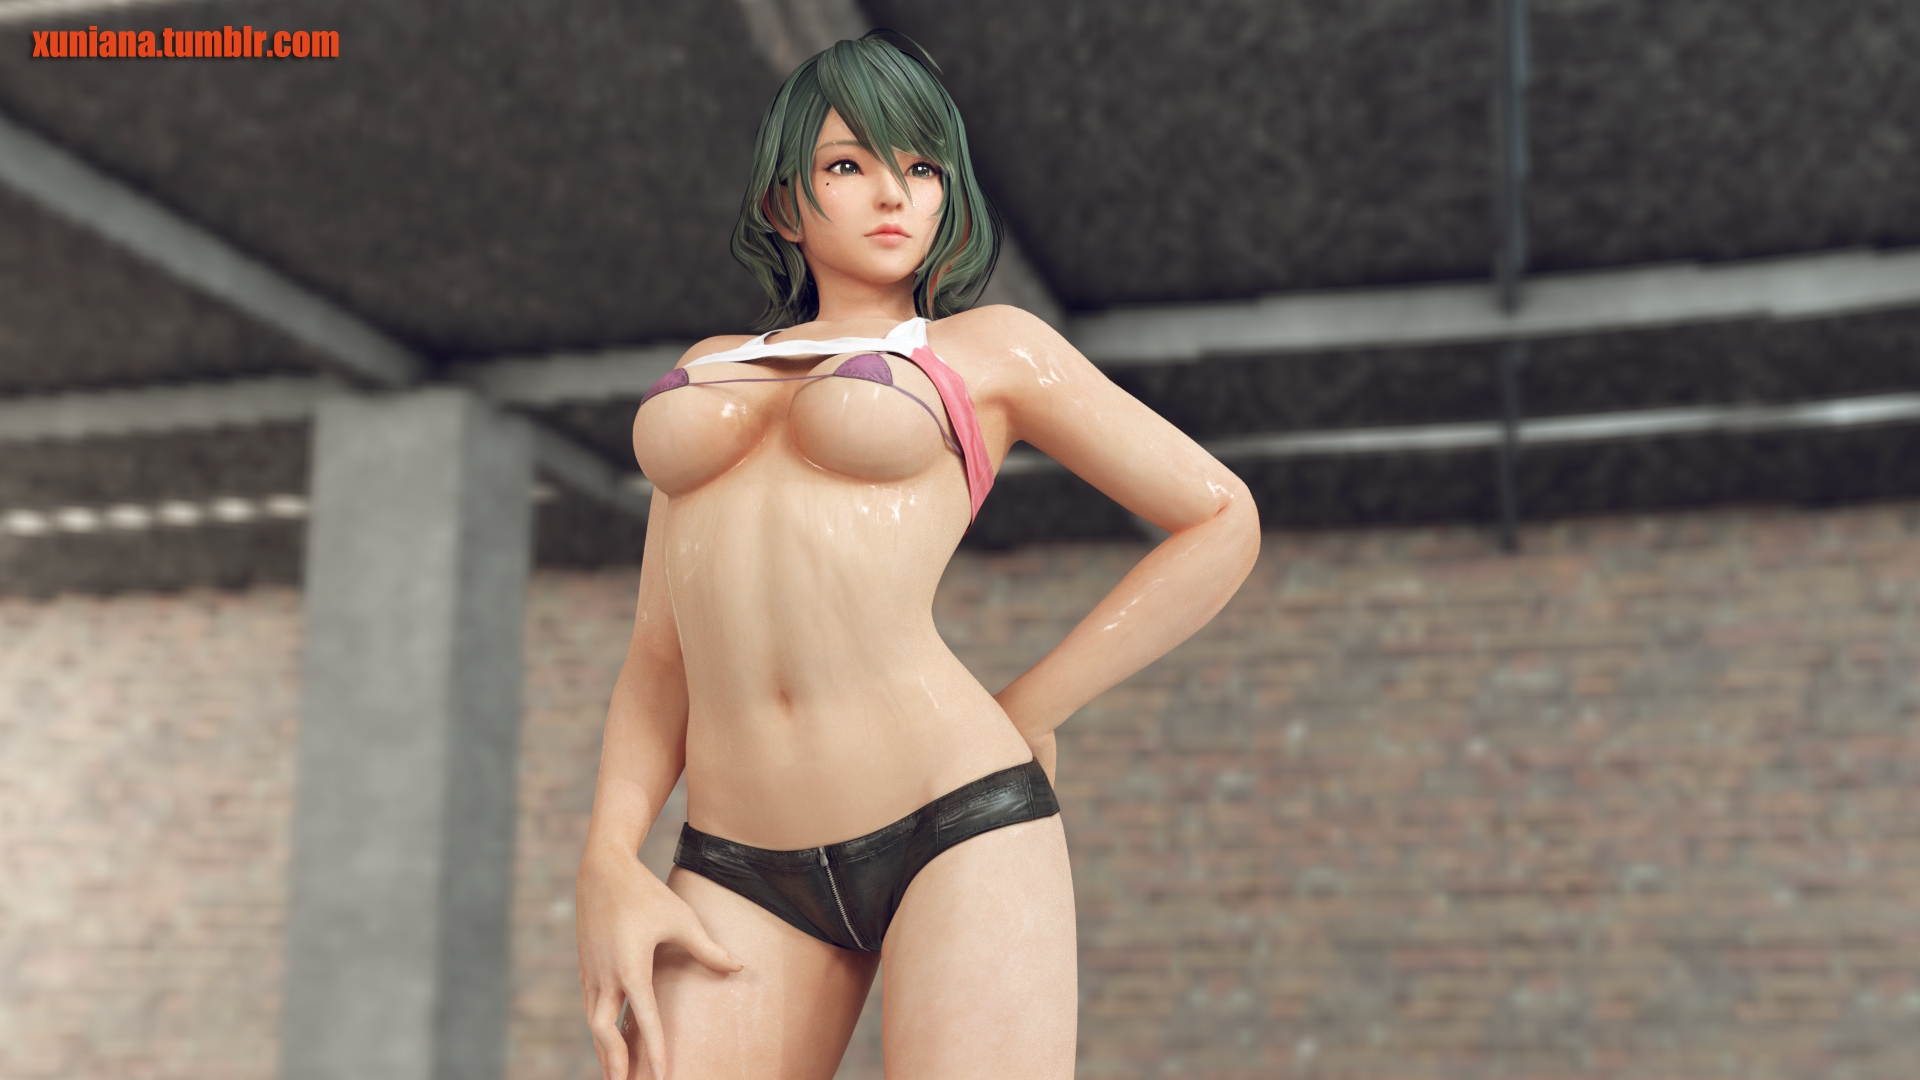 New Comer Tamaki Chan Dead Or Alive Tamaki 3d Porn 3d Girl 3dnsfw Sexy Natural Boobs Posing Naked